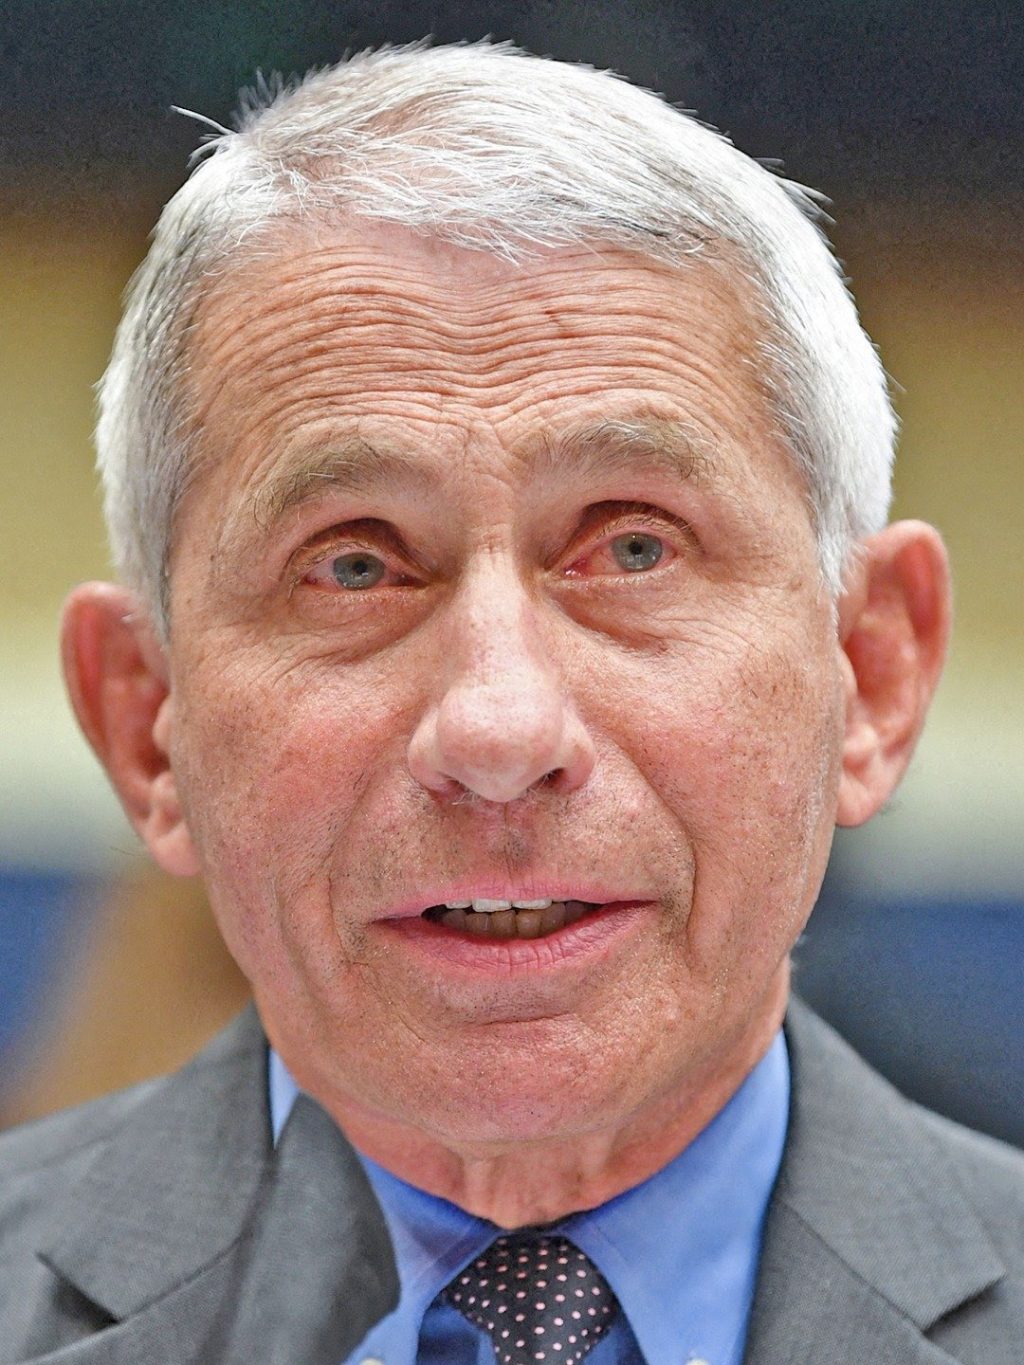 Anthony Fauci will retire soon